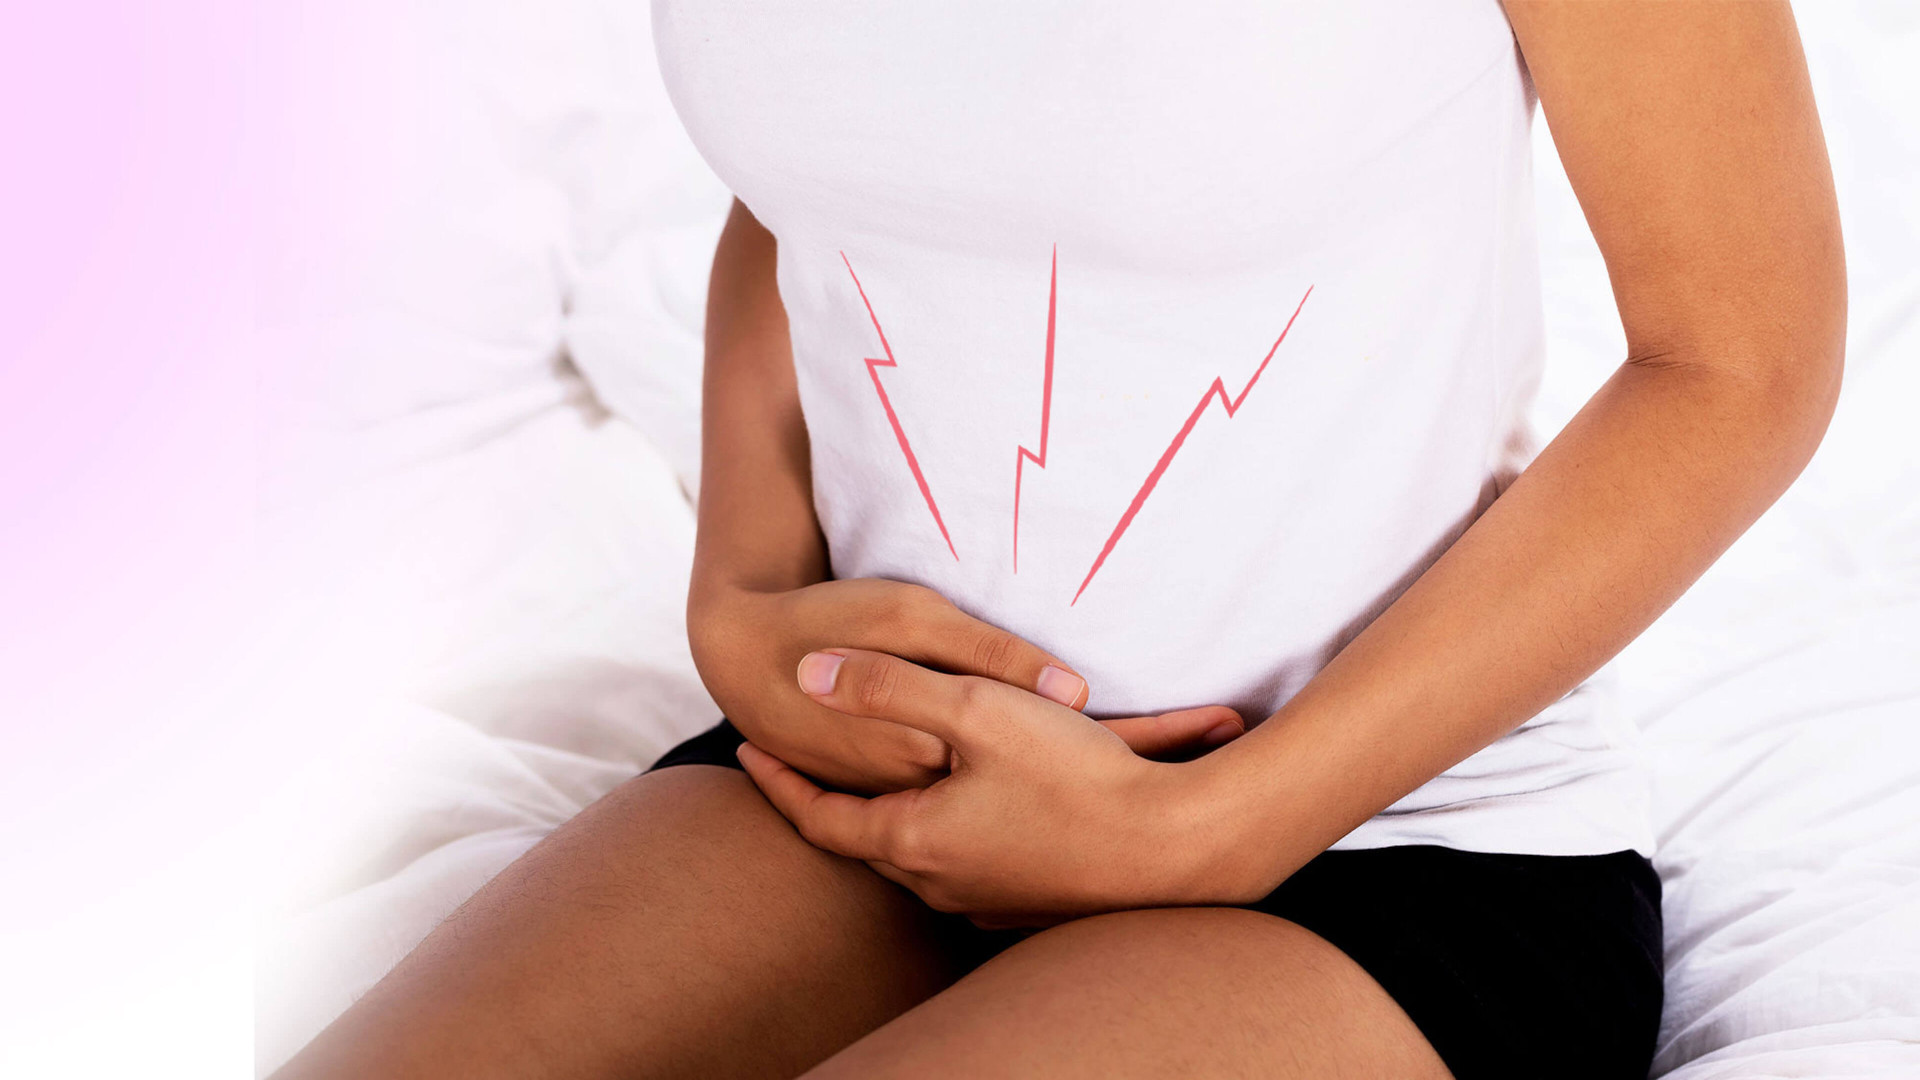 Implantation Cramping: Pregnant? Or Just Your Period?